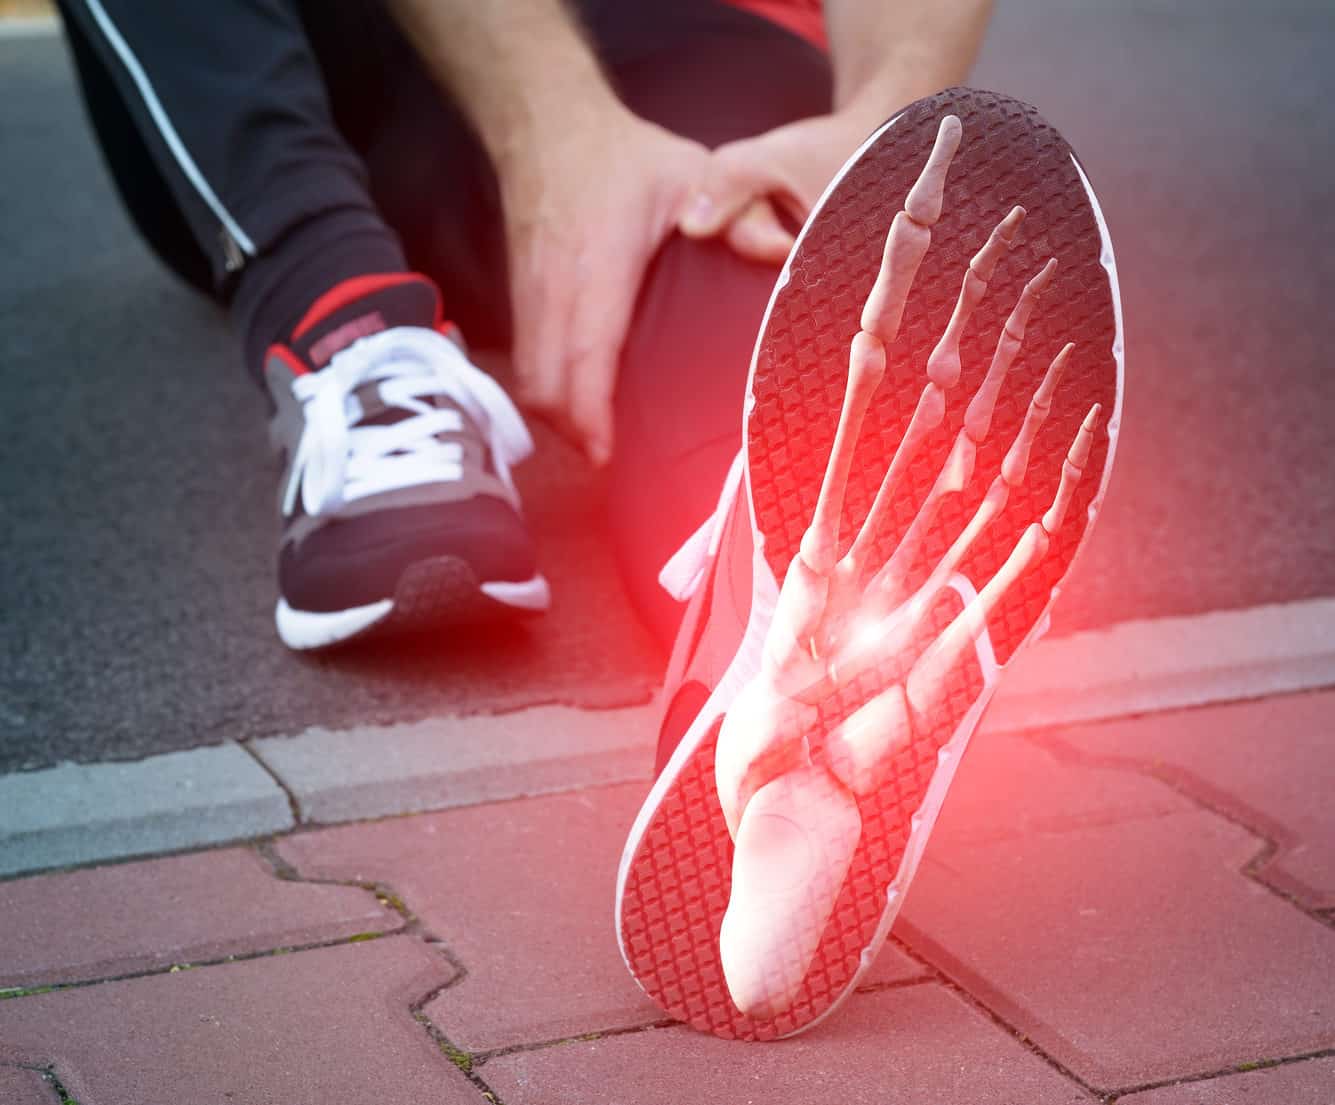 How Physical Therapy Can Help Your Forefoot Pain